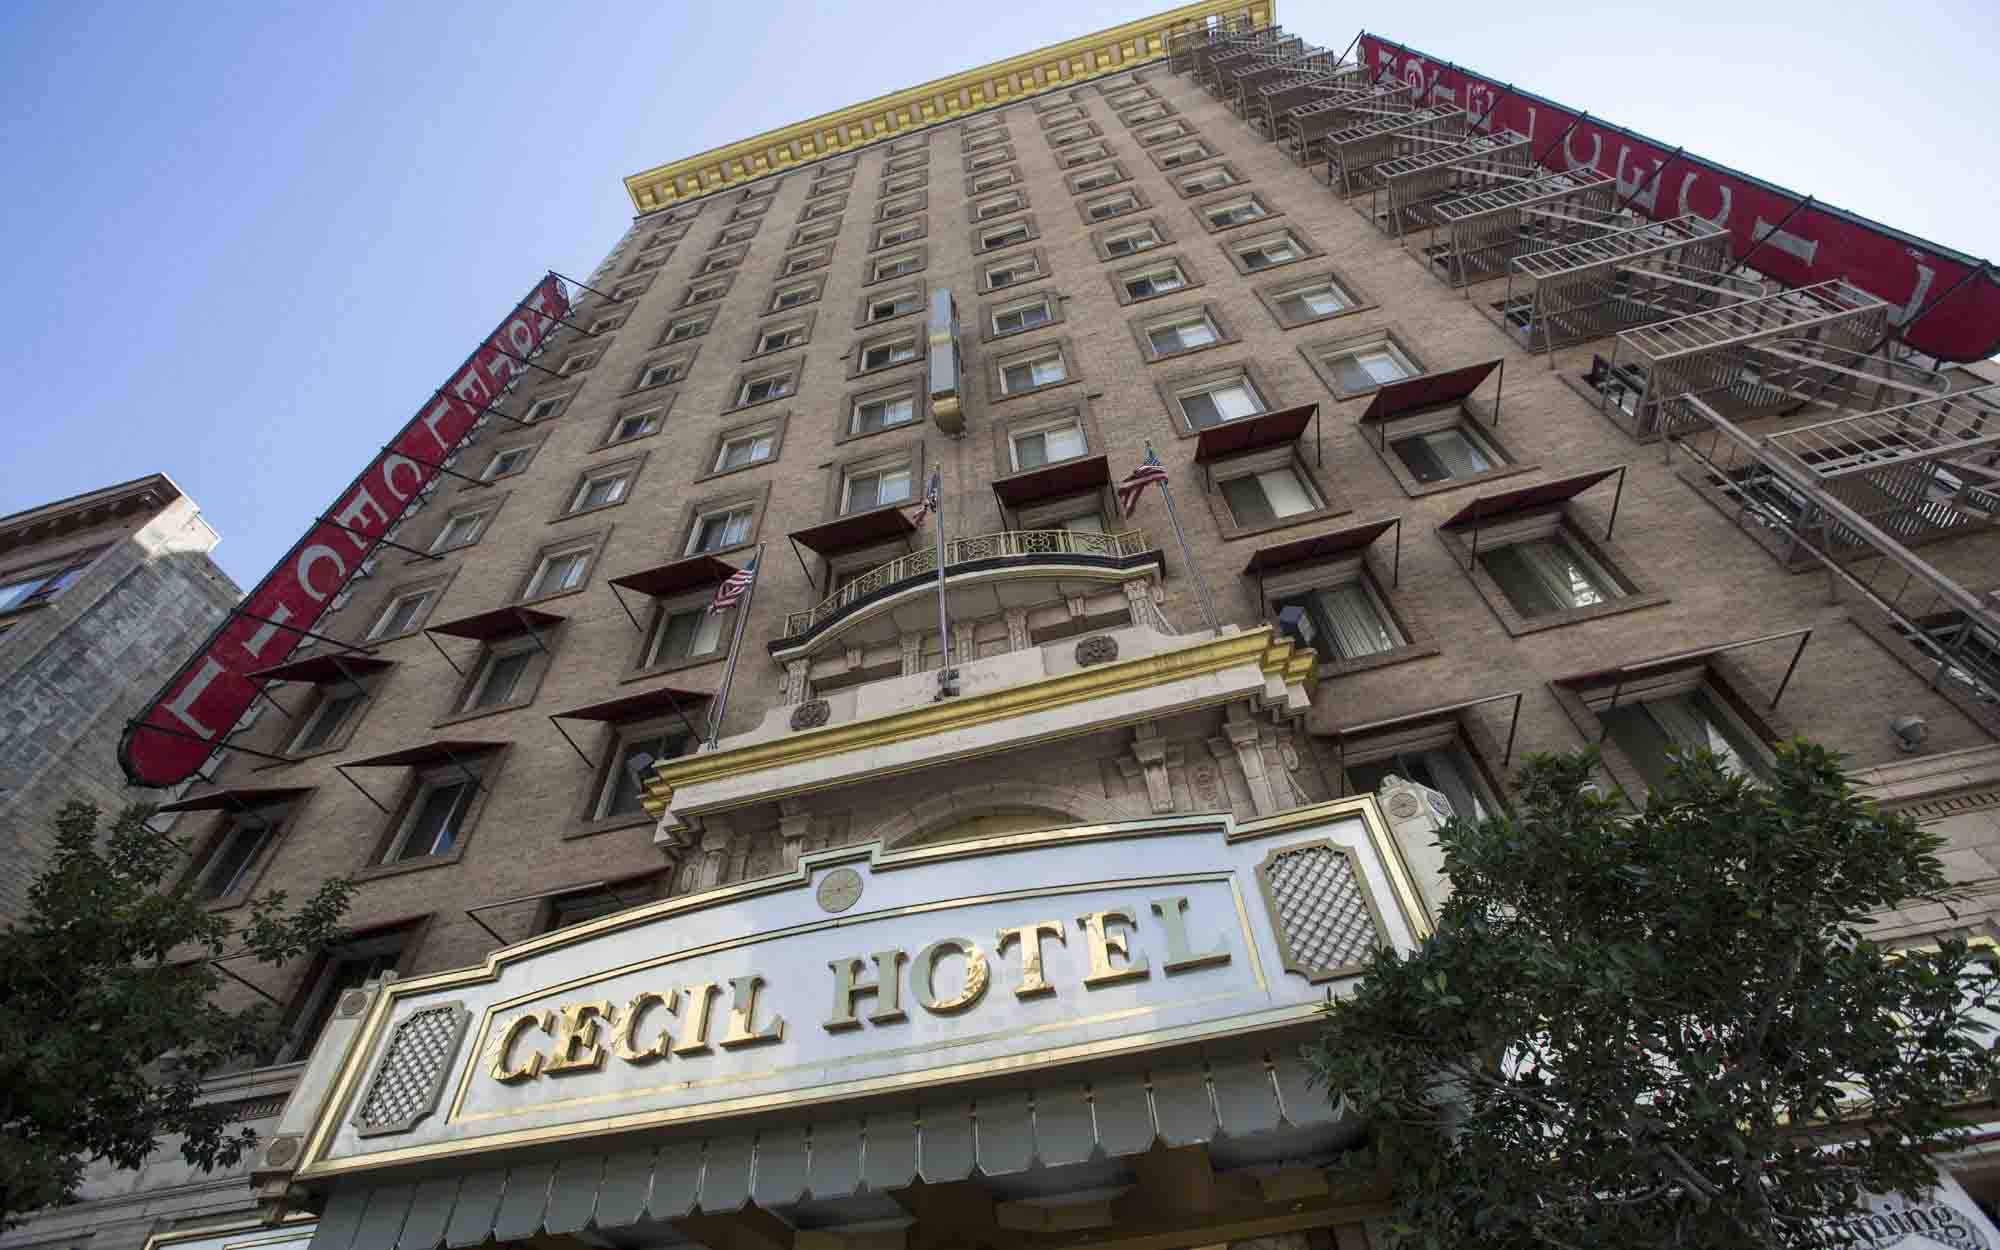 The Hotel Cecil: Everything to know about its blood-soaked past